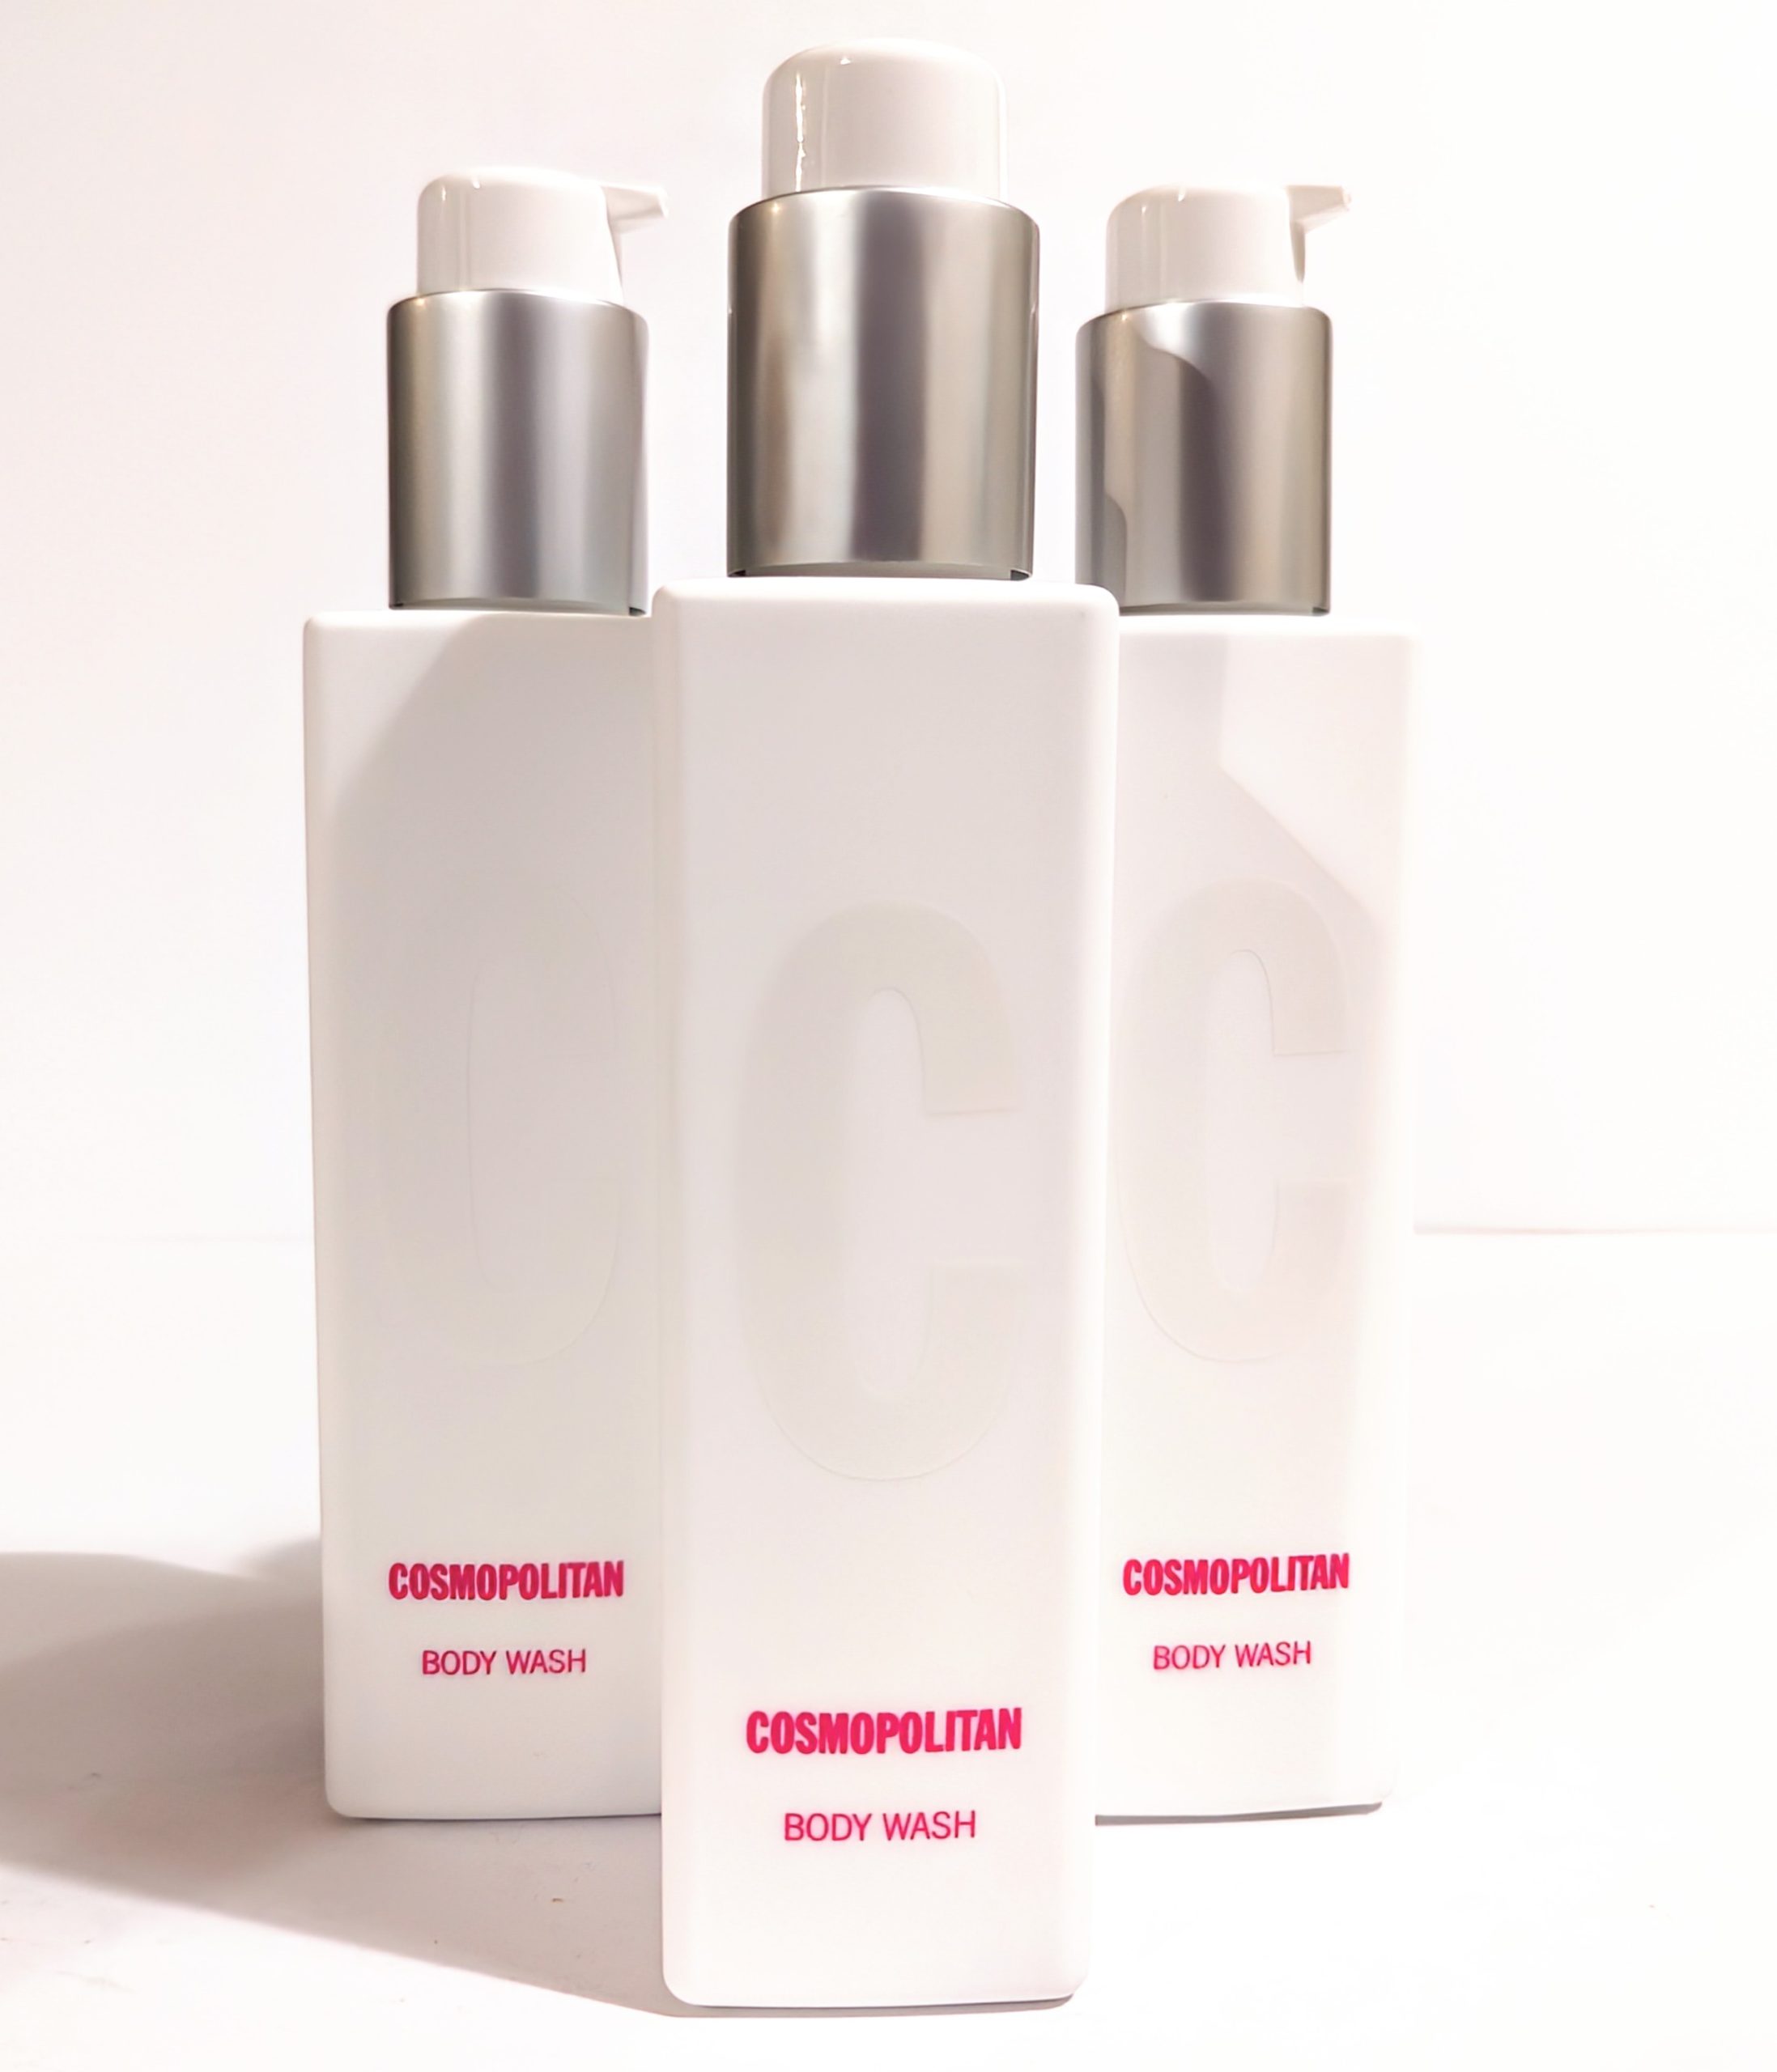 Three white bottles of Cosmopolitan Body Wash with silver pumps are arranged in the image, showing the product label. The bottles feature large embossed “C” letters on the front.